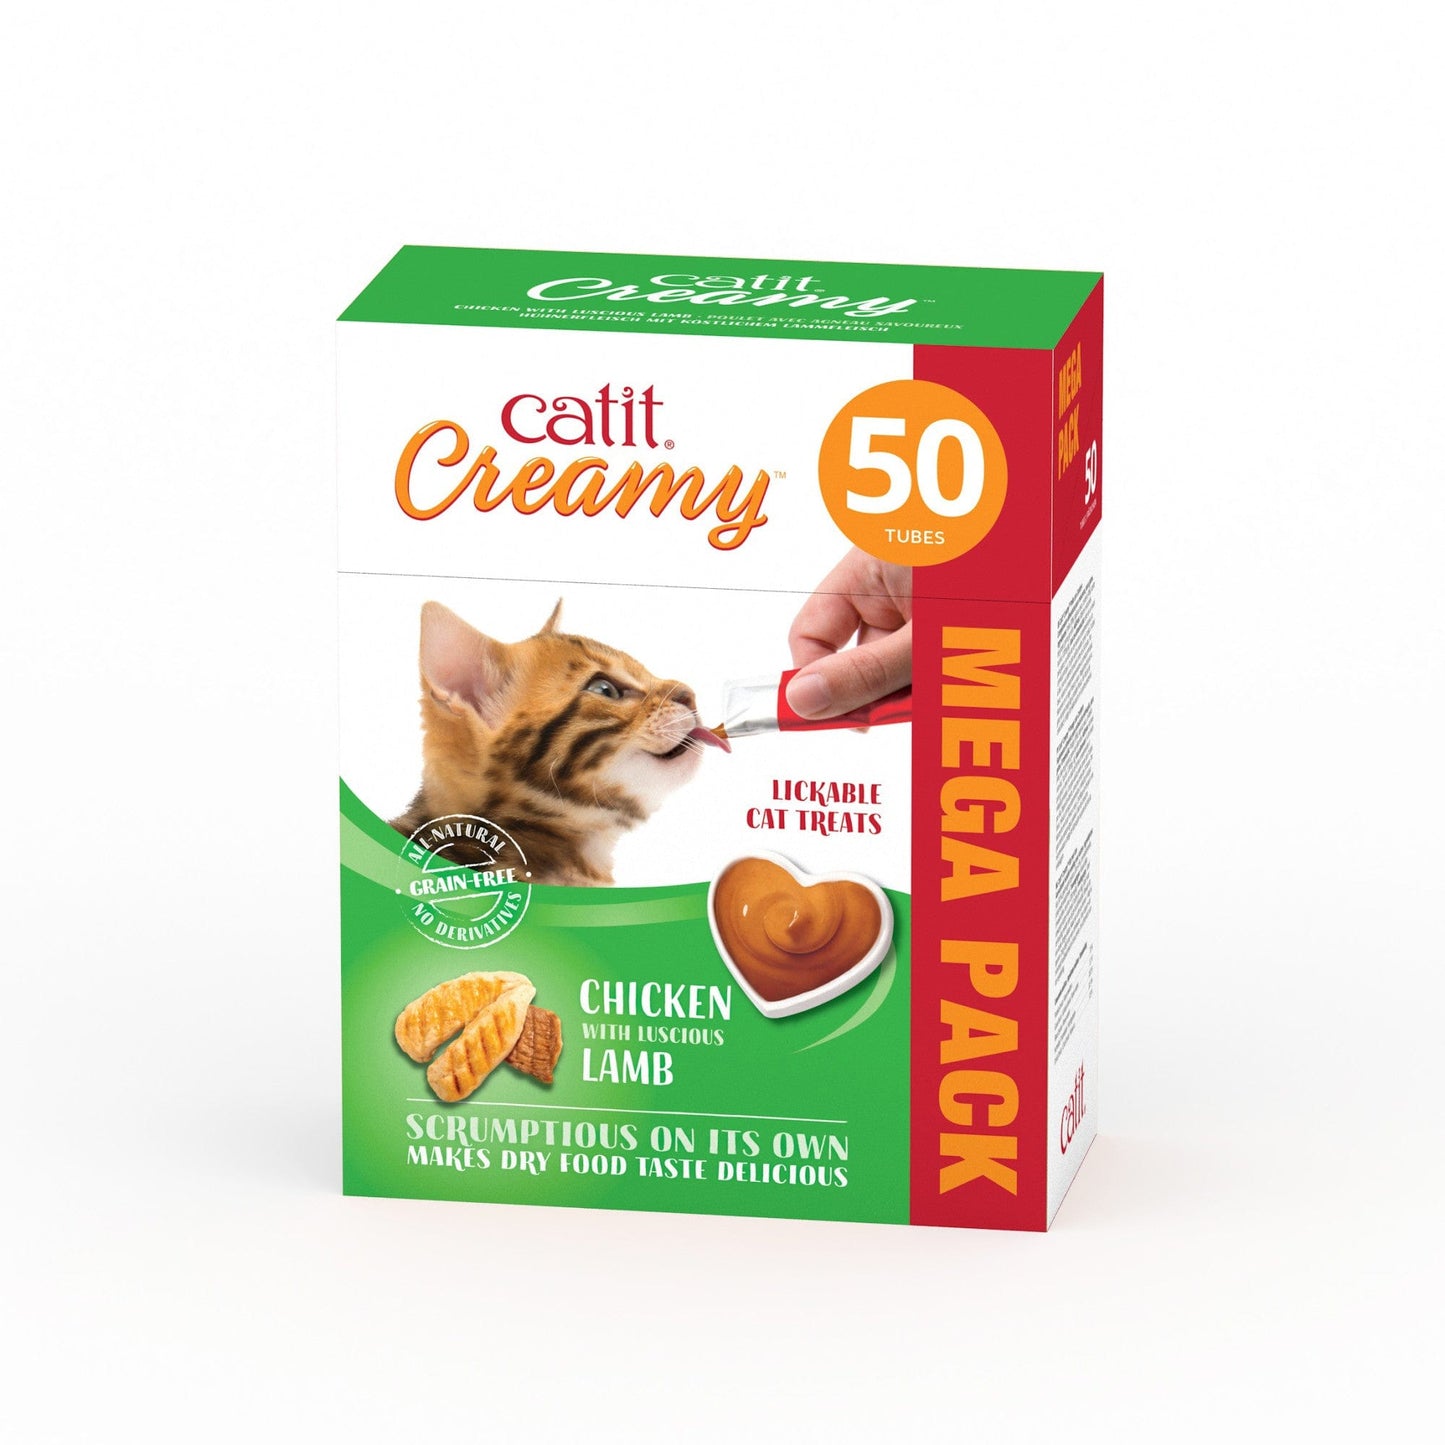 CATIT Creamy Cat Treat Chicken with Lamb Tube (50x10g) - product image. This is a product of Pets Villa.